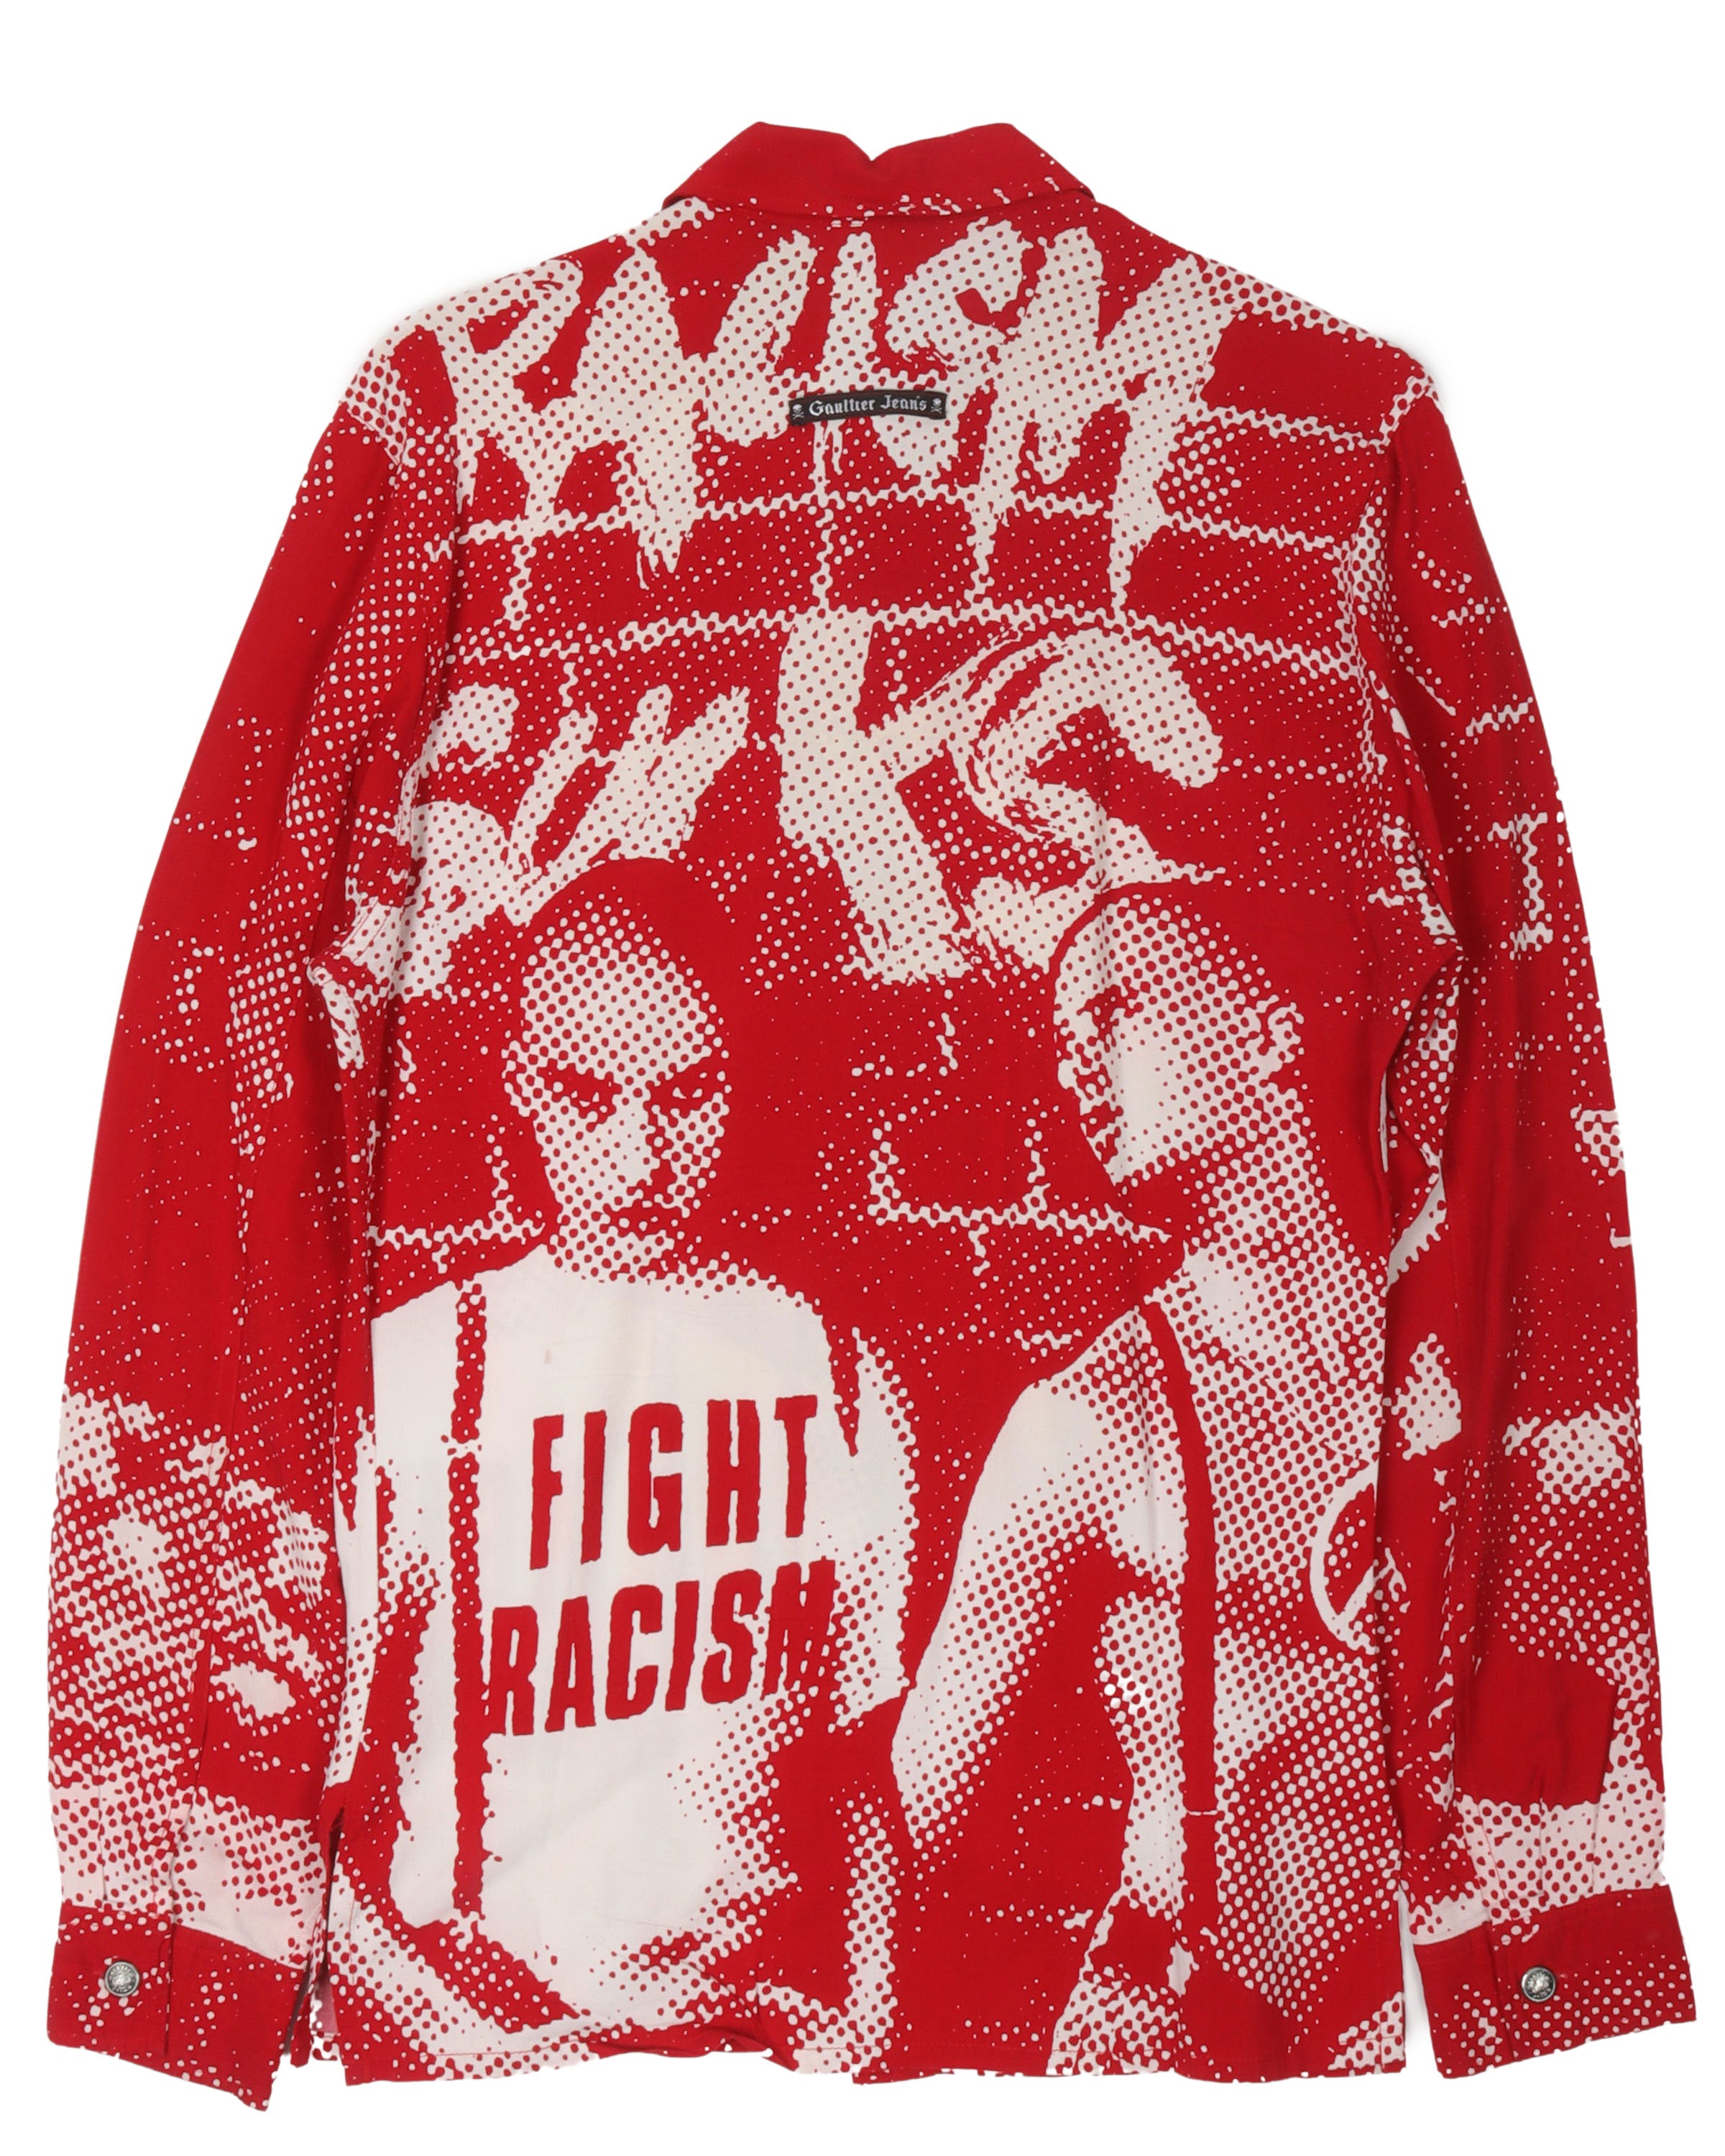 AW97 Gaultier Jeans "Fight Racism" Shirt